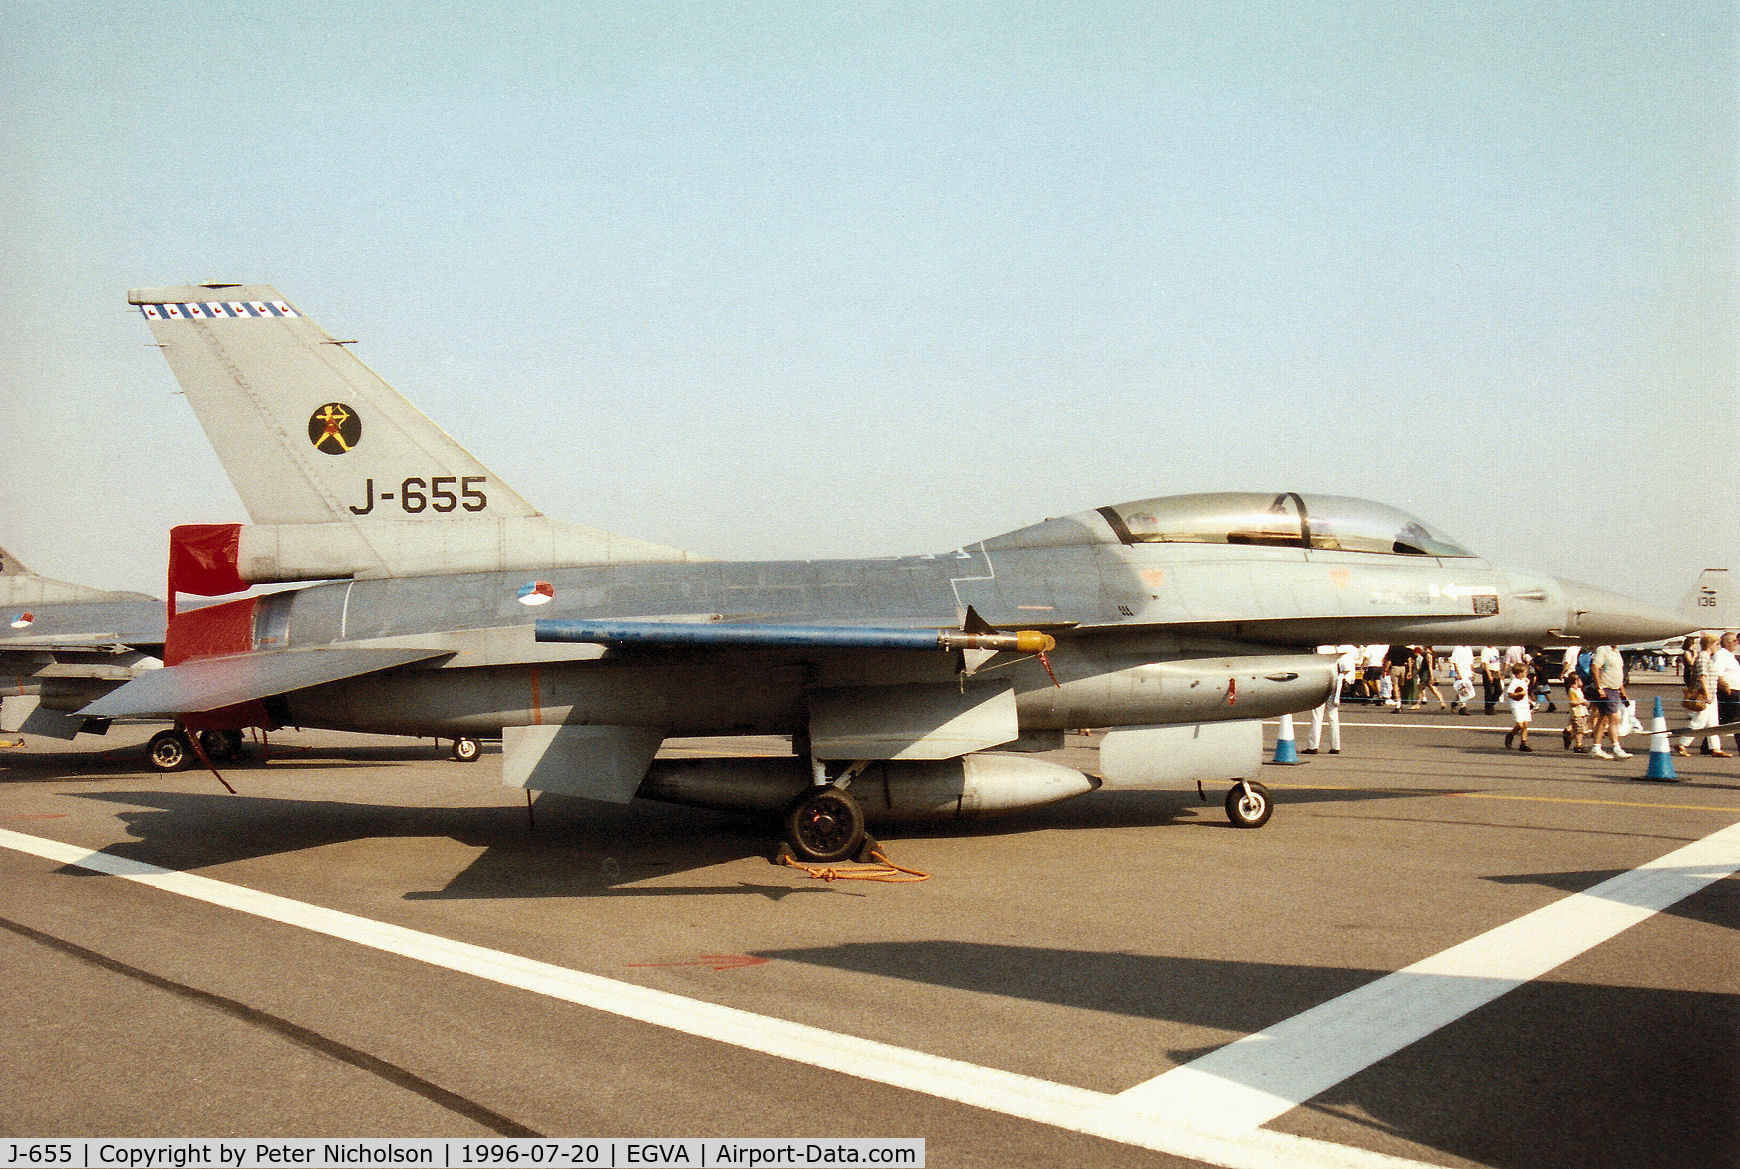 J-655, Fokker F-16B Fighting Falcon C/N 6E-20, F-16B Falcon of 323 Squadron of the Royal Netherlands Air Force at Leeuwarden on display at the 1996 Royal Intnl Air Tattoo at RAF Fairford.